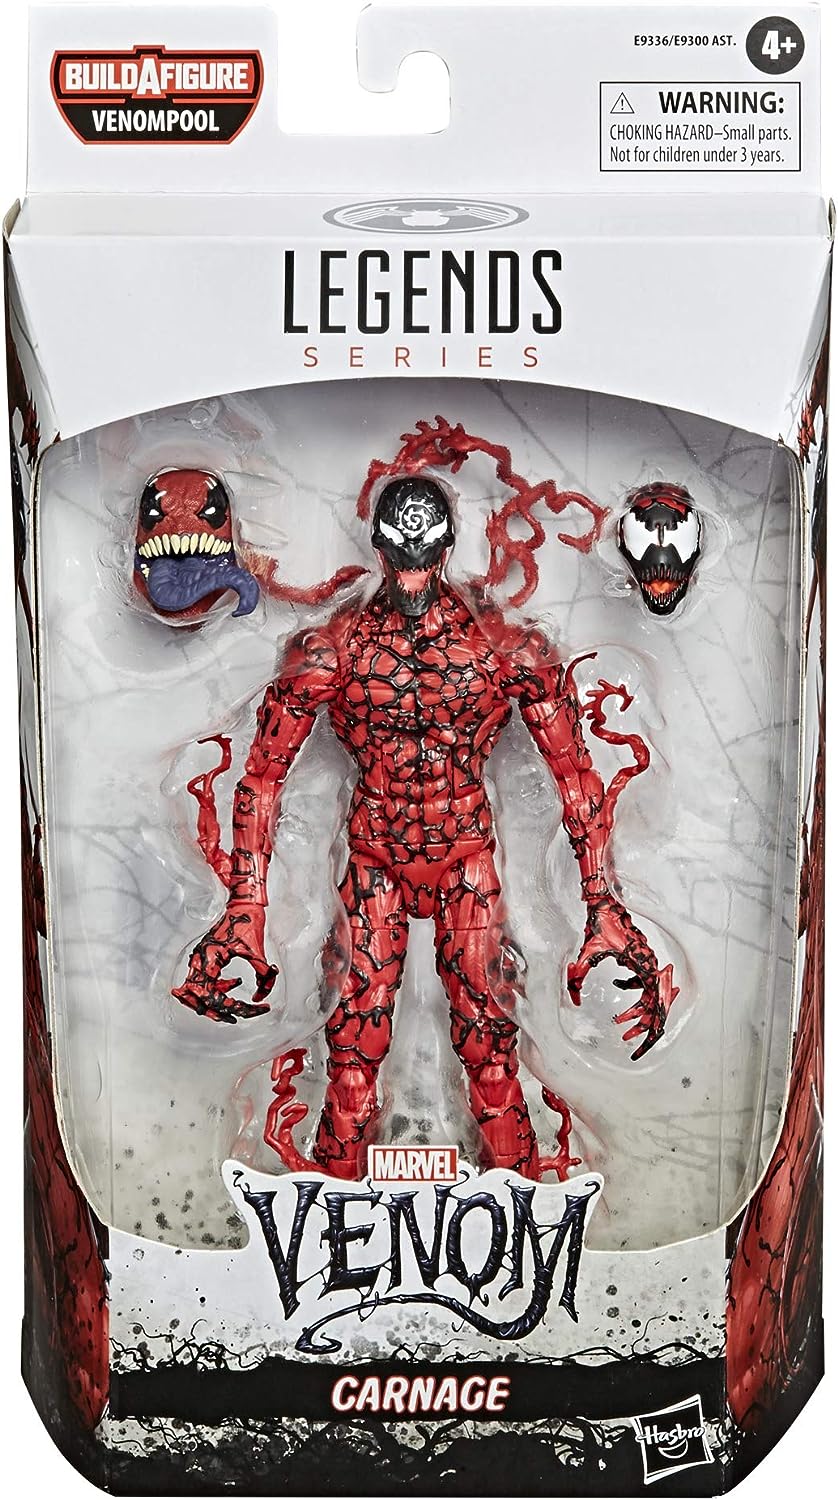 Spider-Man Marvel Legends Series Gamerverse Miles Morales 6-inch  Collectible Action Figure Toy, 7 Accessories and 1 Build-A-Figure Part(s)